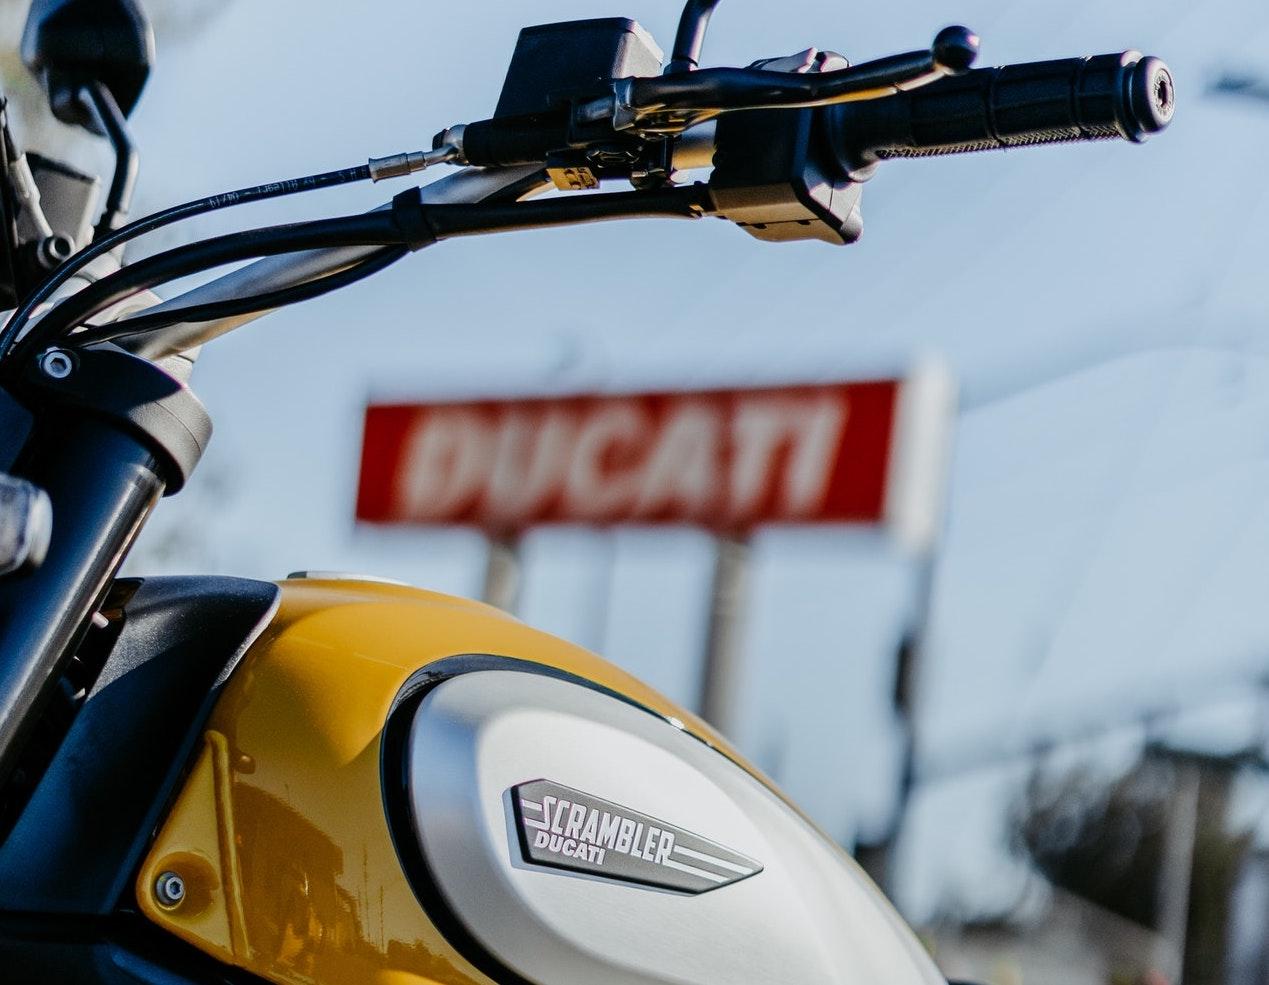 The Streetfighter V4 was the best-selling model of 2020 while the Ducati Scrambler was the best-selling family. Photo: Pexels